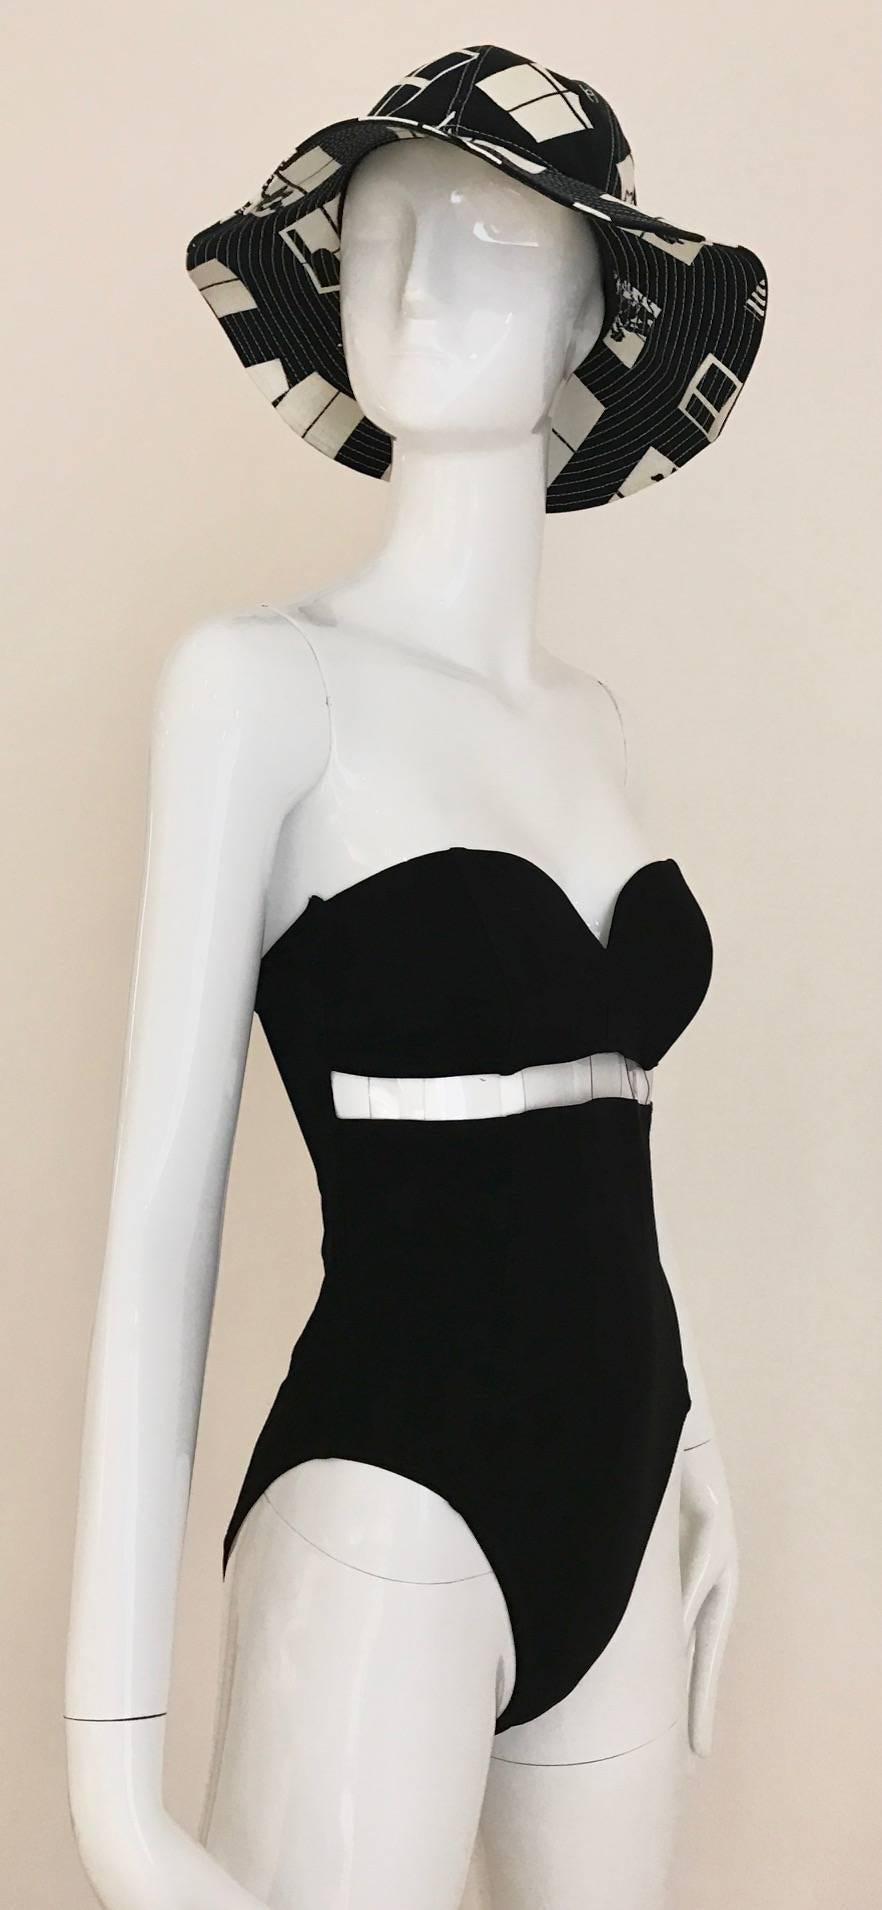 UNWORN PACO RABANNE Black One Piece swimsuit/ bathing suit with cutout clear plastic. Work well as body suit. Swimwear is style with vintage Chanel Hat available at my 1stdibs store. 
Fit size 4
Measurement: 
Bust: 32 - 34 inch / Waist: 28 inch /